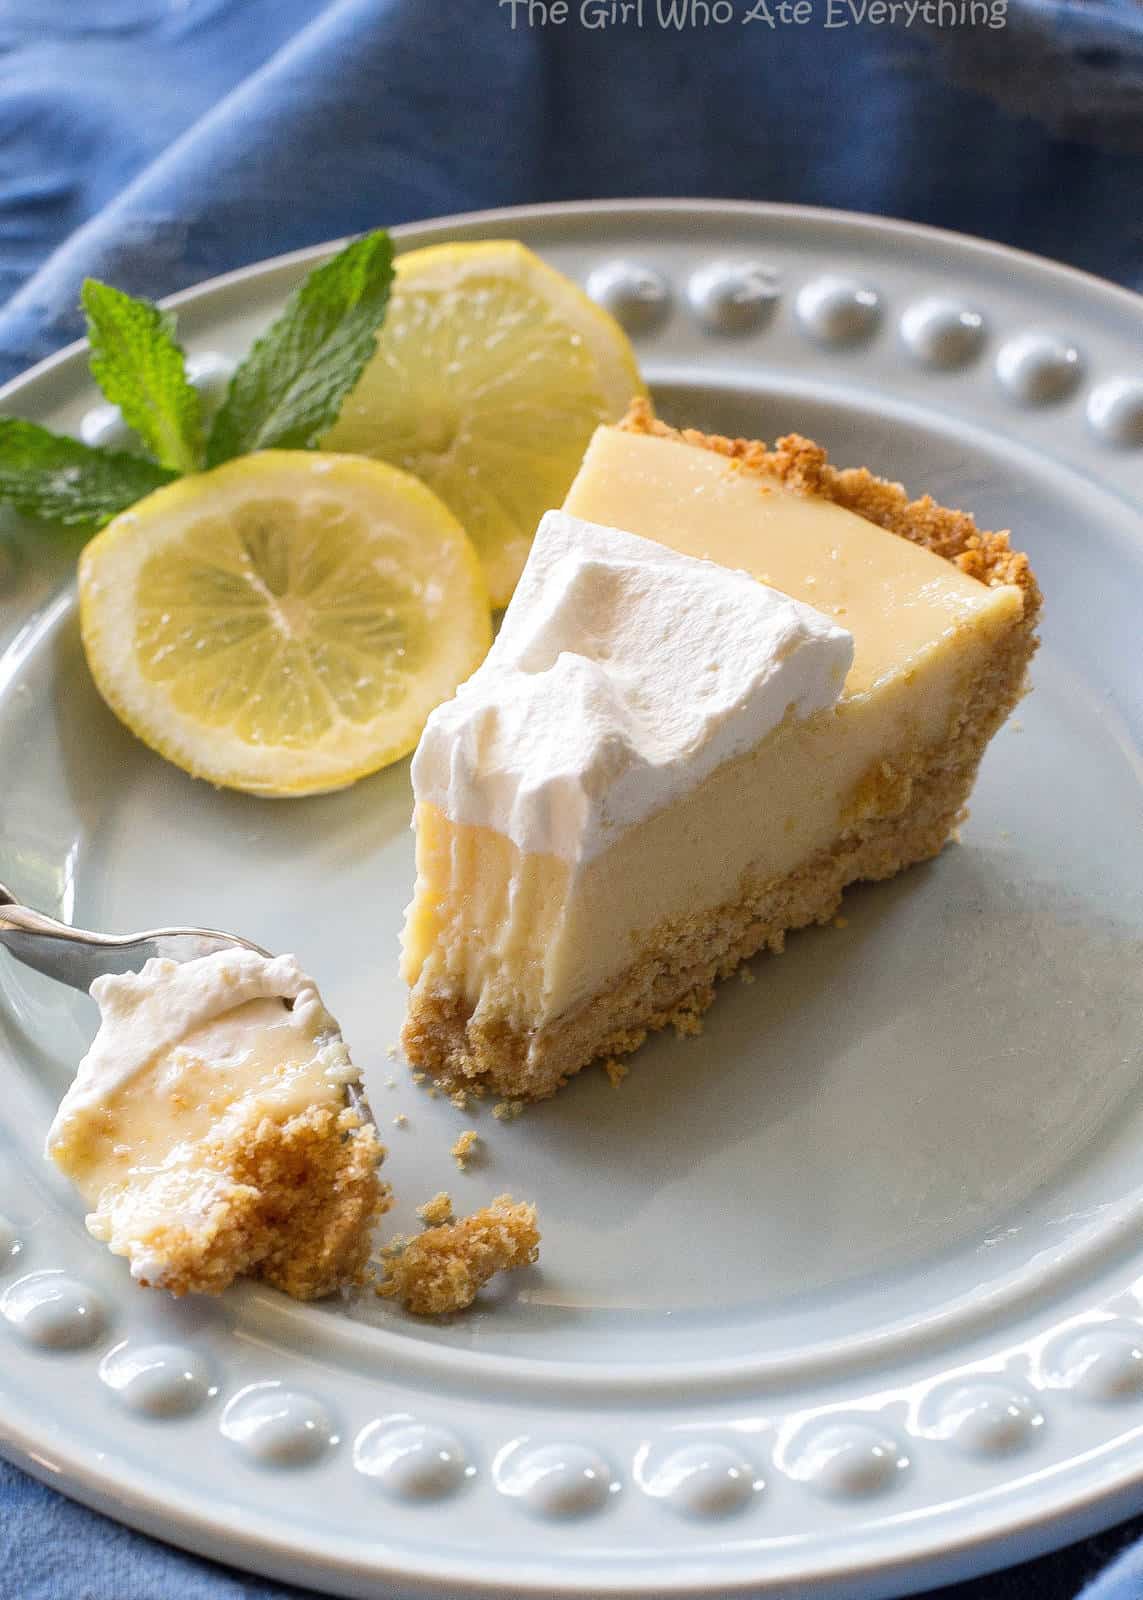 Lemon Pie - light, sweet and tart lemon pie with a thick graham cracker crust. From Joanna Gaines from Magnolia Market! the-girl-who-ate-everything.com